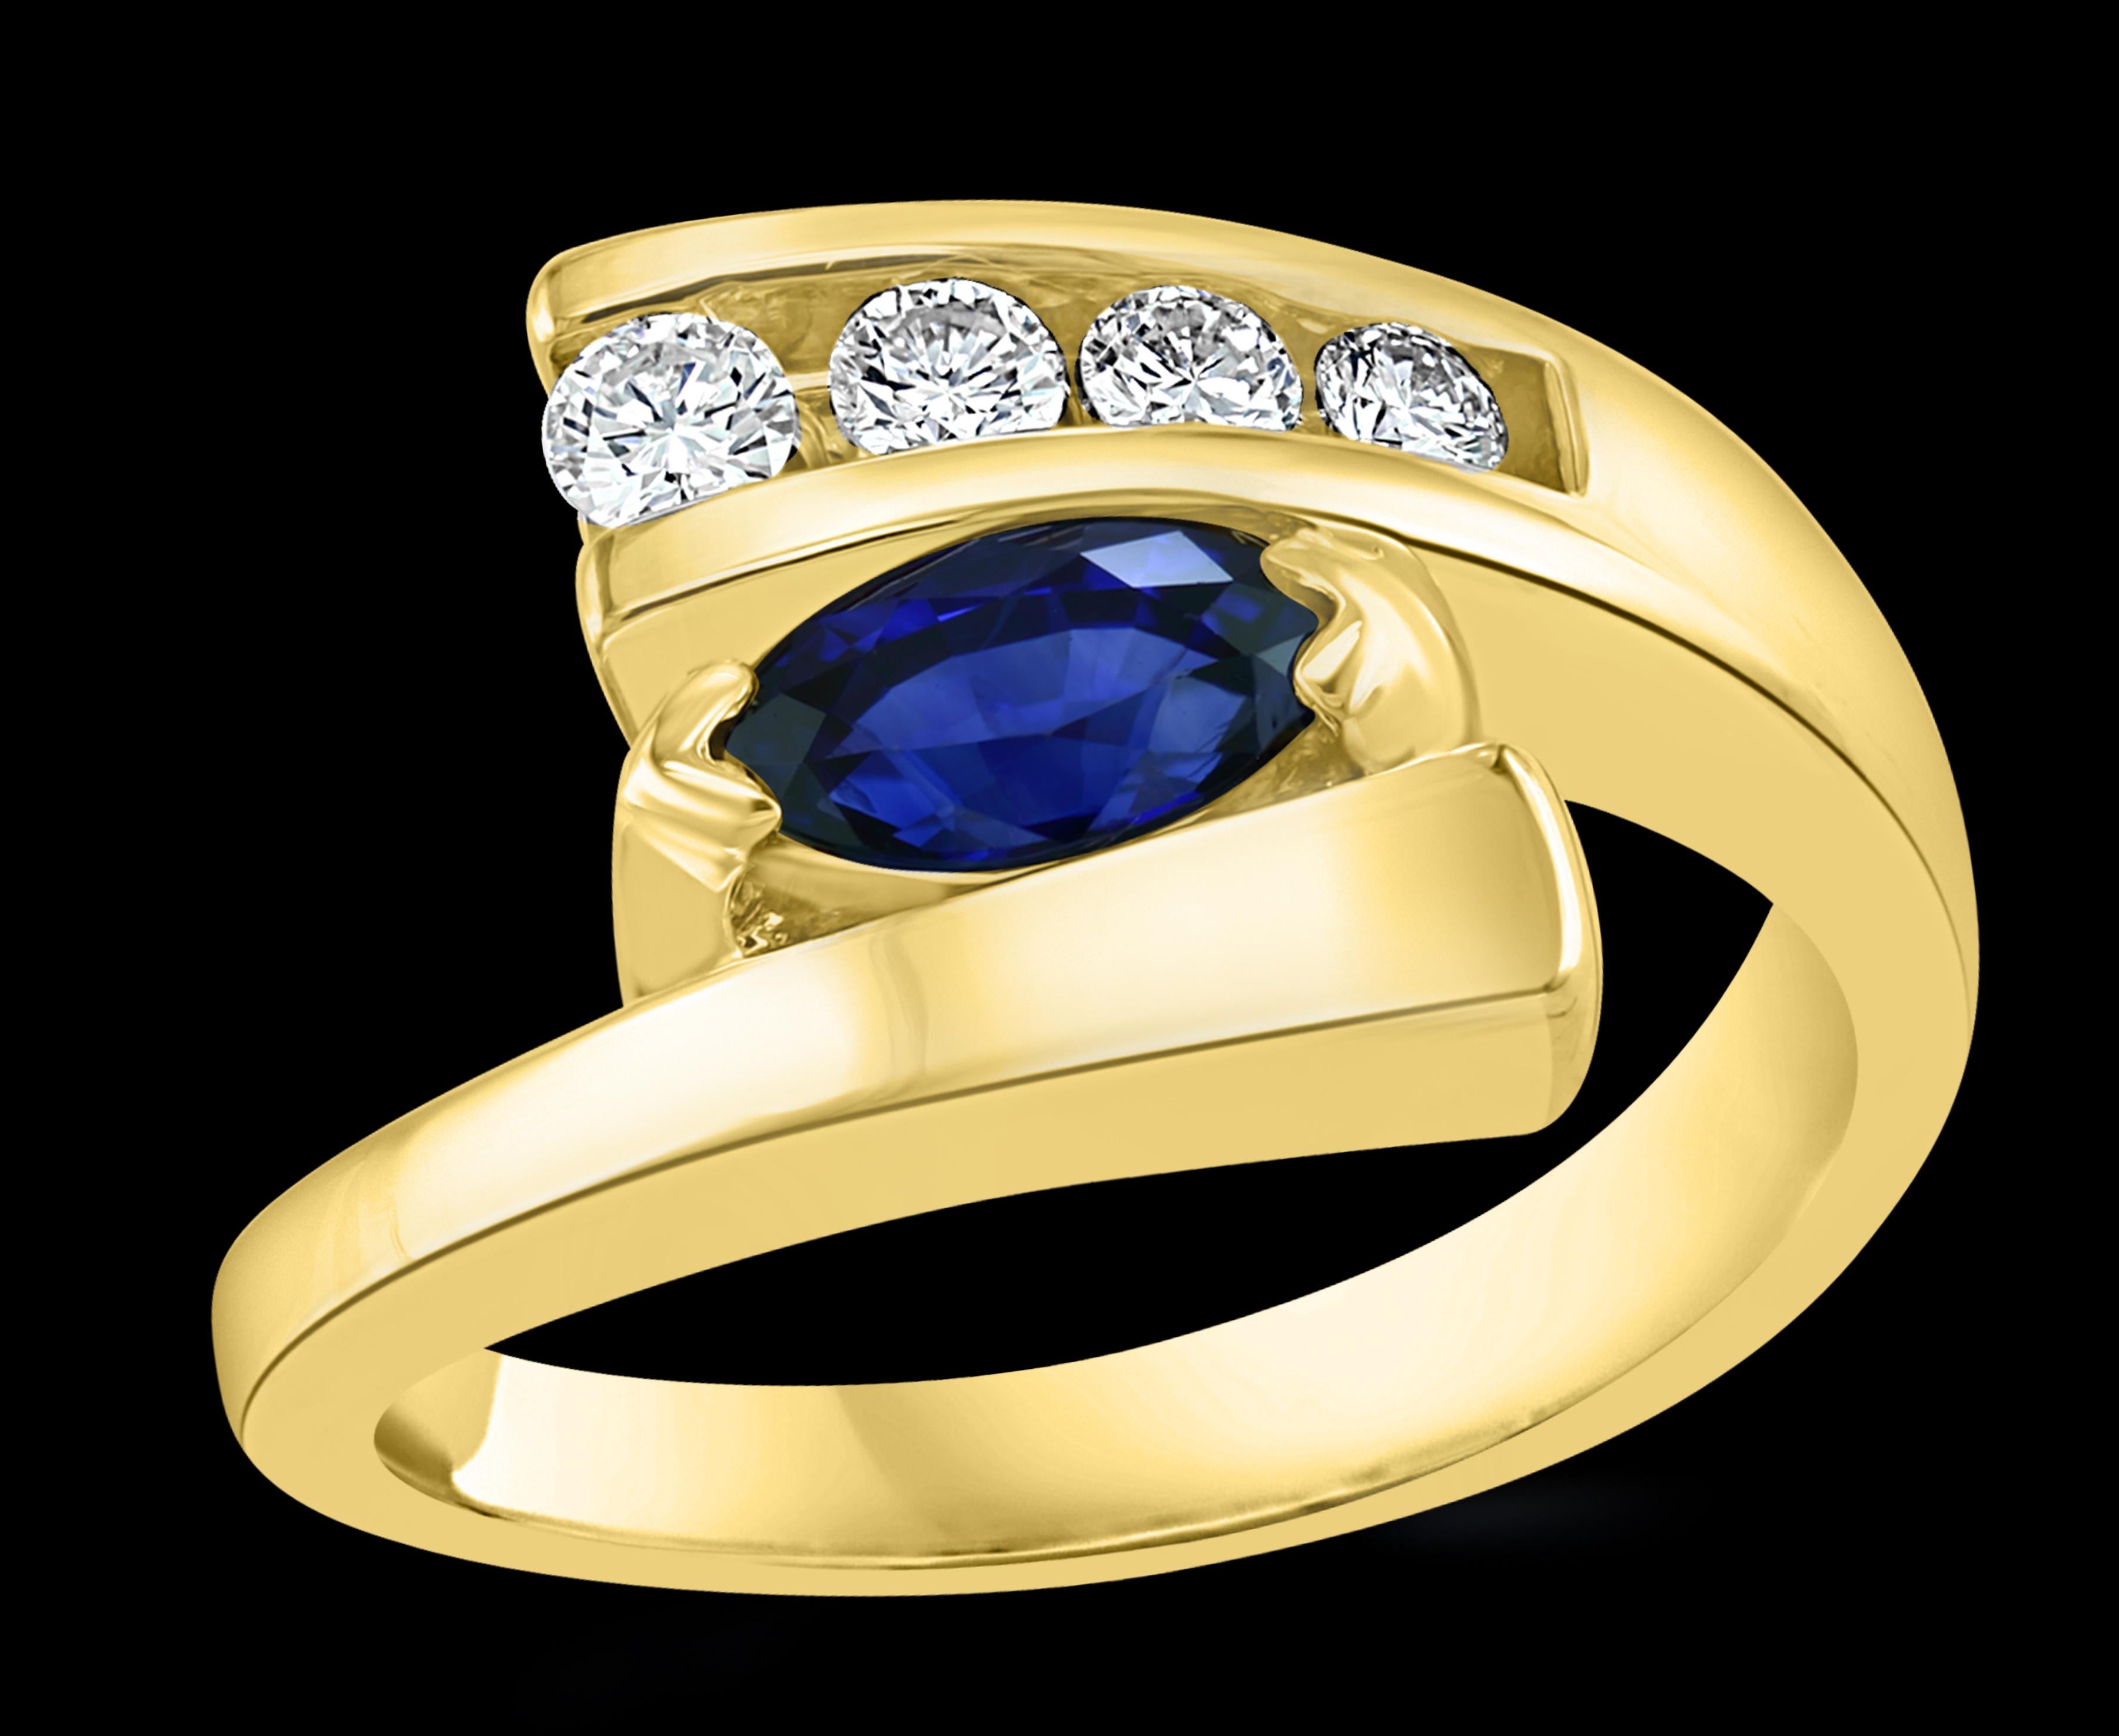 Oval Natural  Blue Sapphire & Diamond Engagement Ring in 14 Karat Yellow Gold
Approximately 1/2 Ct Oval Blue Sapphire 
4 Round Brilliant cut diamond 
14 Karat yellow Gold 6.3 Grams
Ring Size 4 ( it can be resized to any size for free of